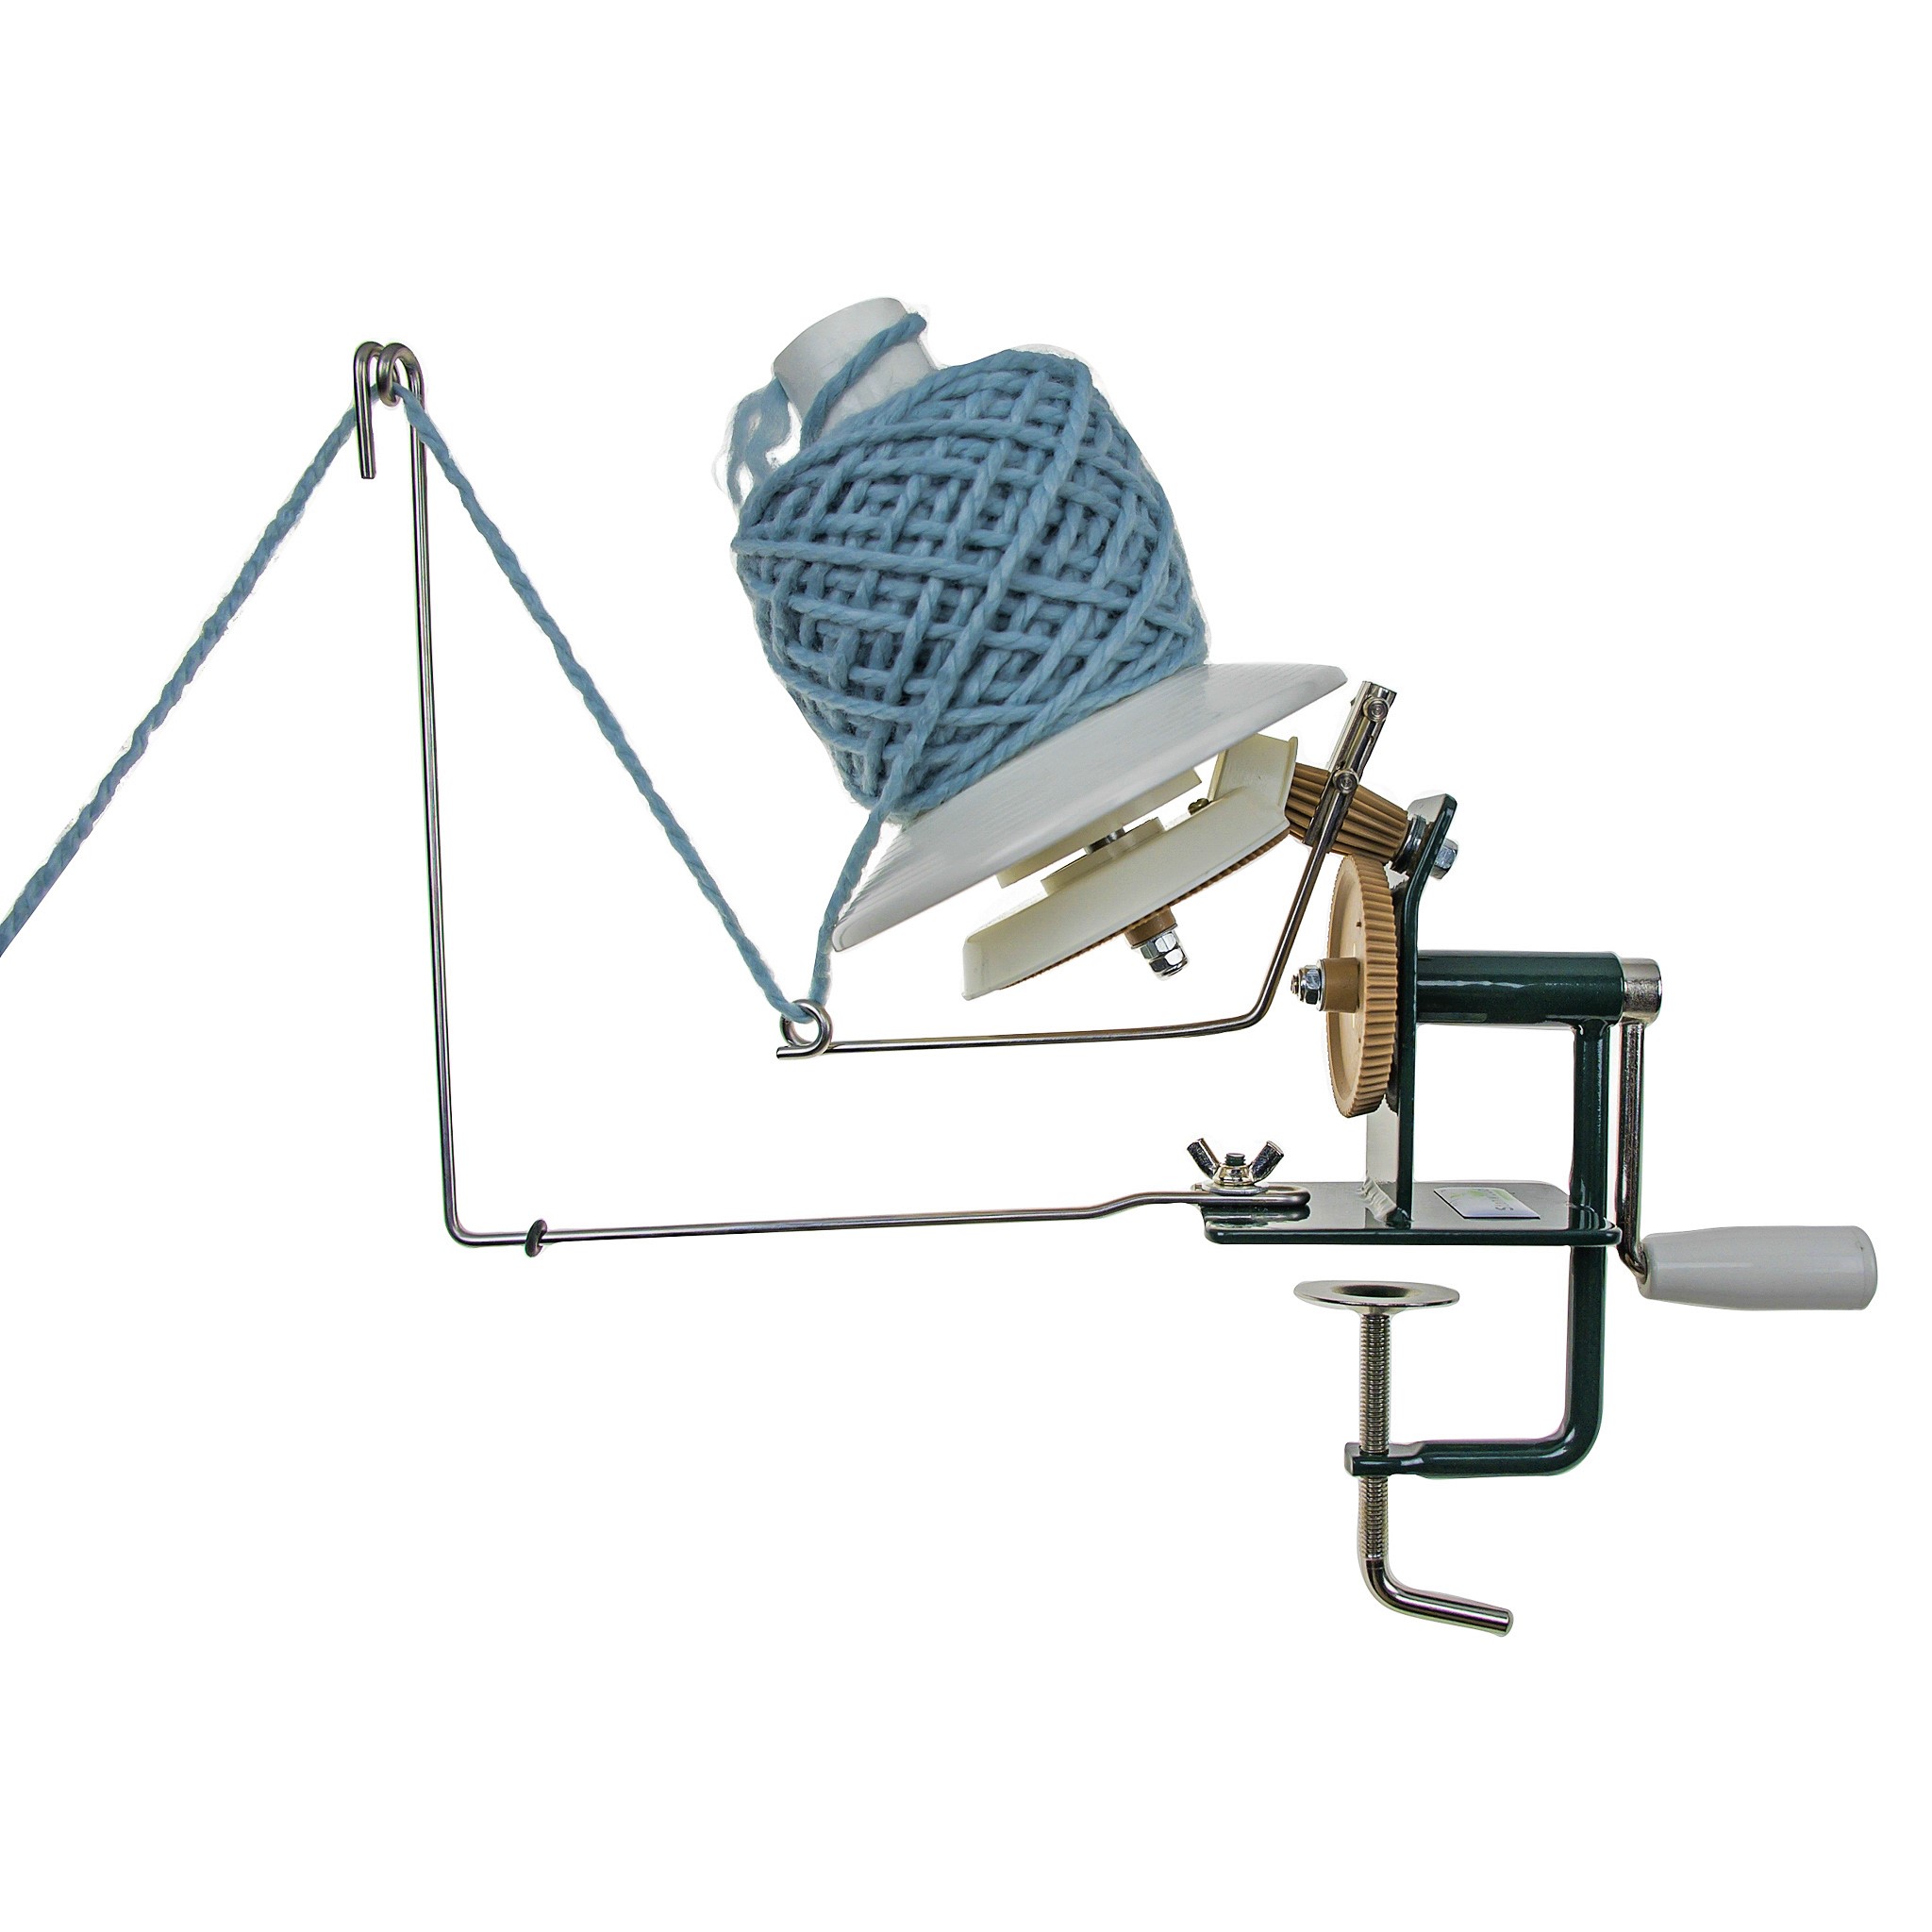  Metal Hand Operated Yarn Winder for Crocheting - High  Performance Large Yarn Ball Winder 10 Oz Capacity - Quiet Yarn Spinner with  Steel Frame, Table Protectors, and Clamp - Easy to